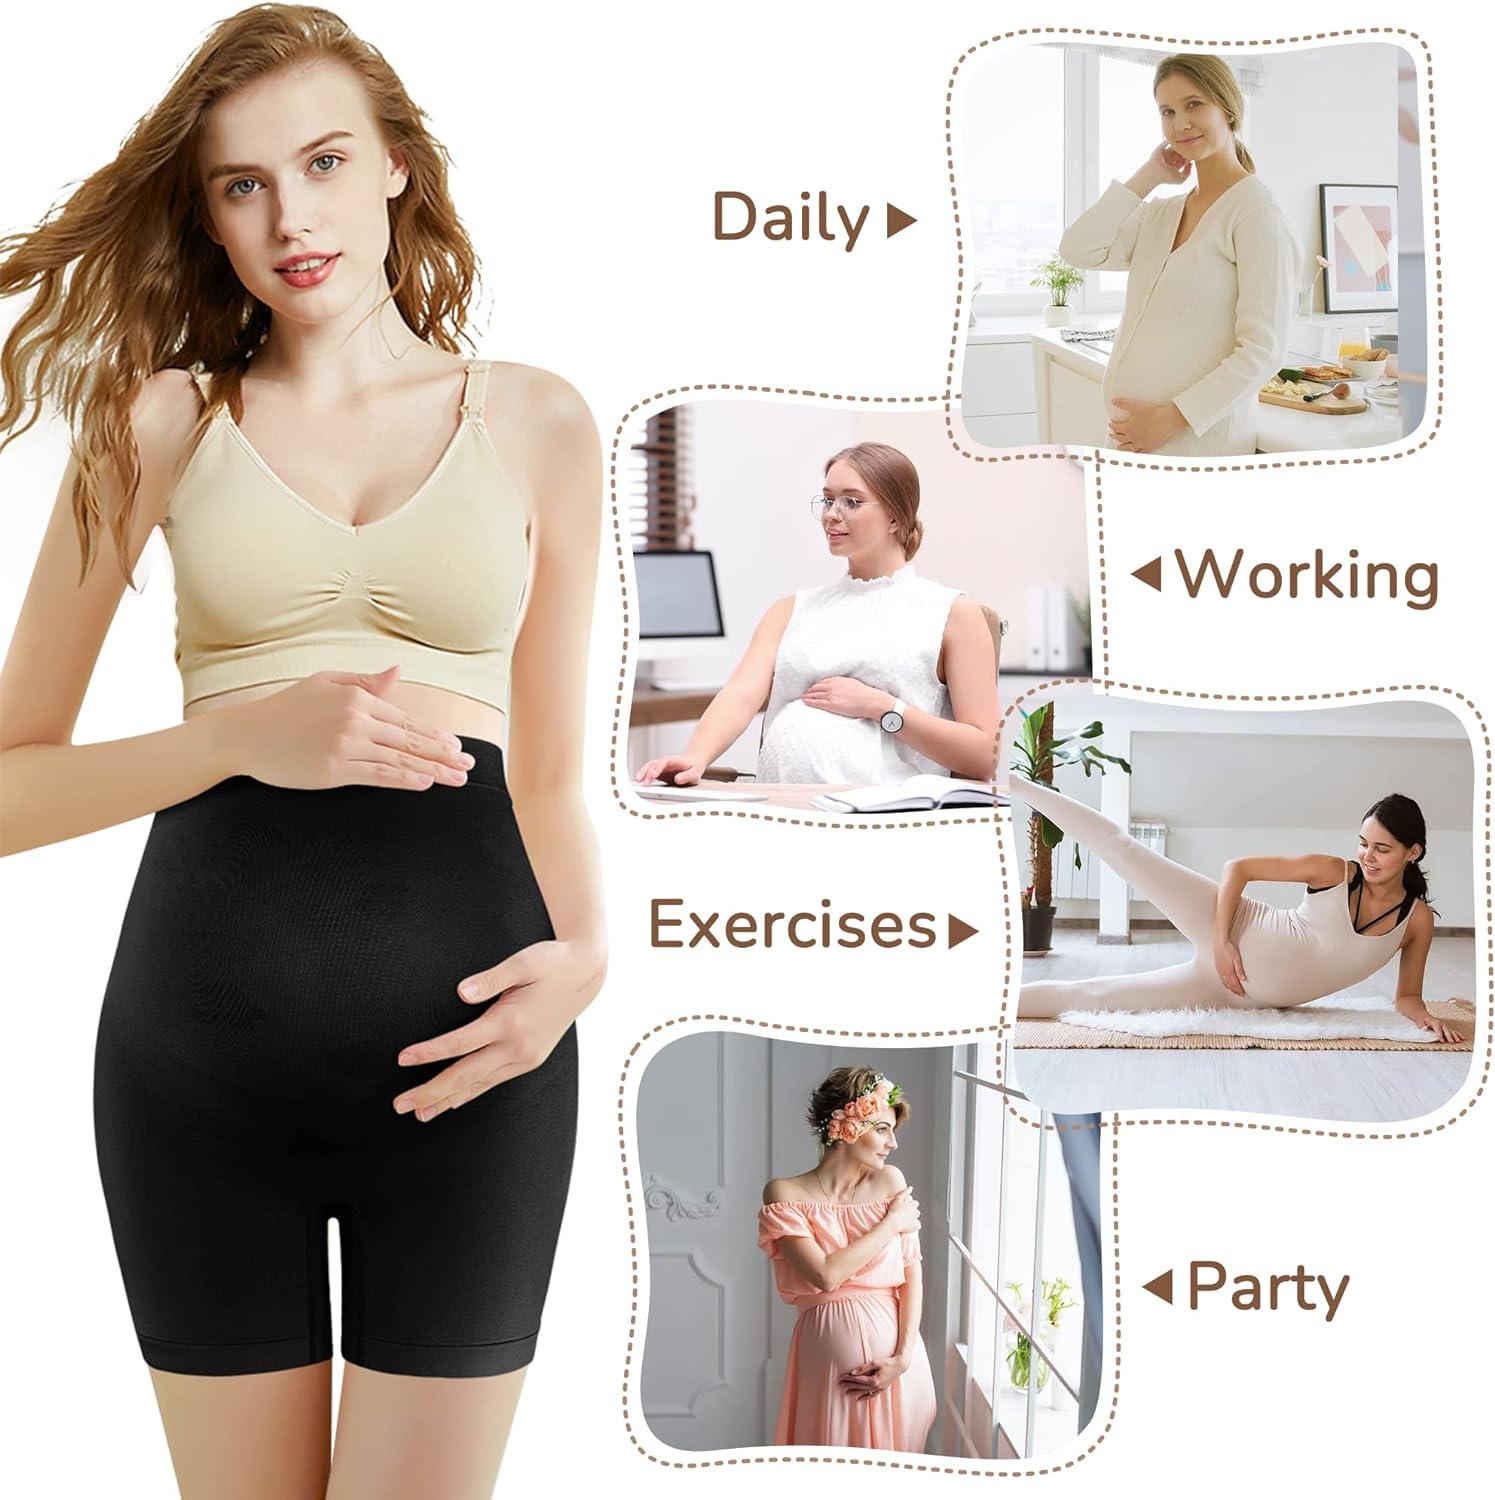 Maternity Shapewear for Dresses,Low Waisted Mid-Thigh,Women's Soft and  Seamless Pregnancy Underwear Prevent Chaffing Soft Shaper for Belly